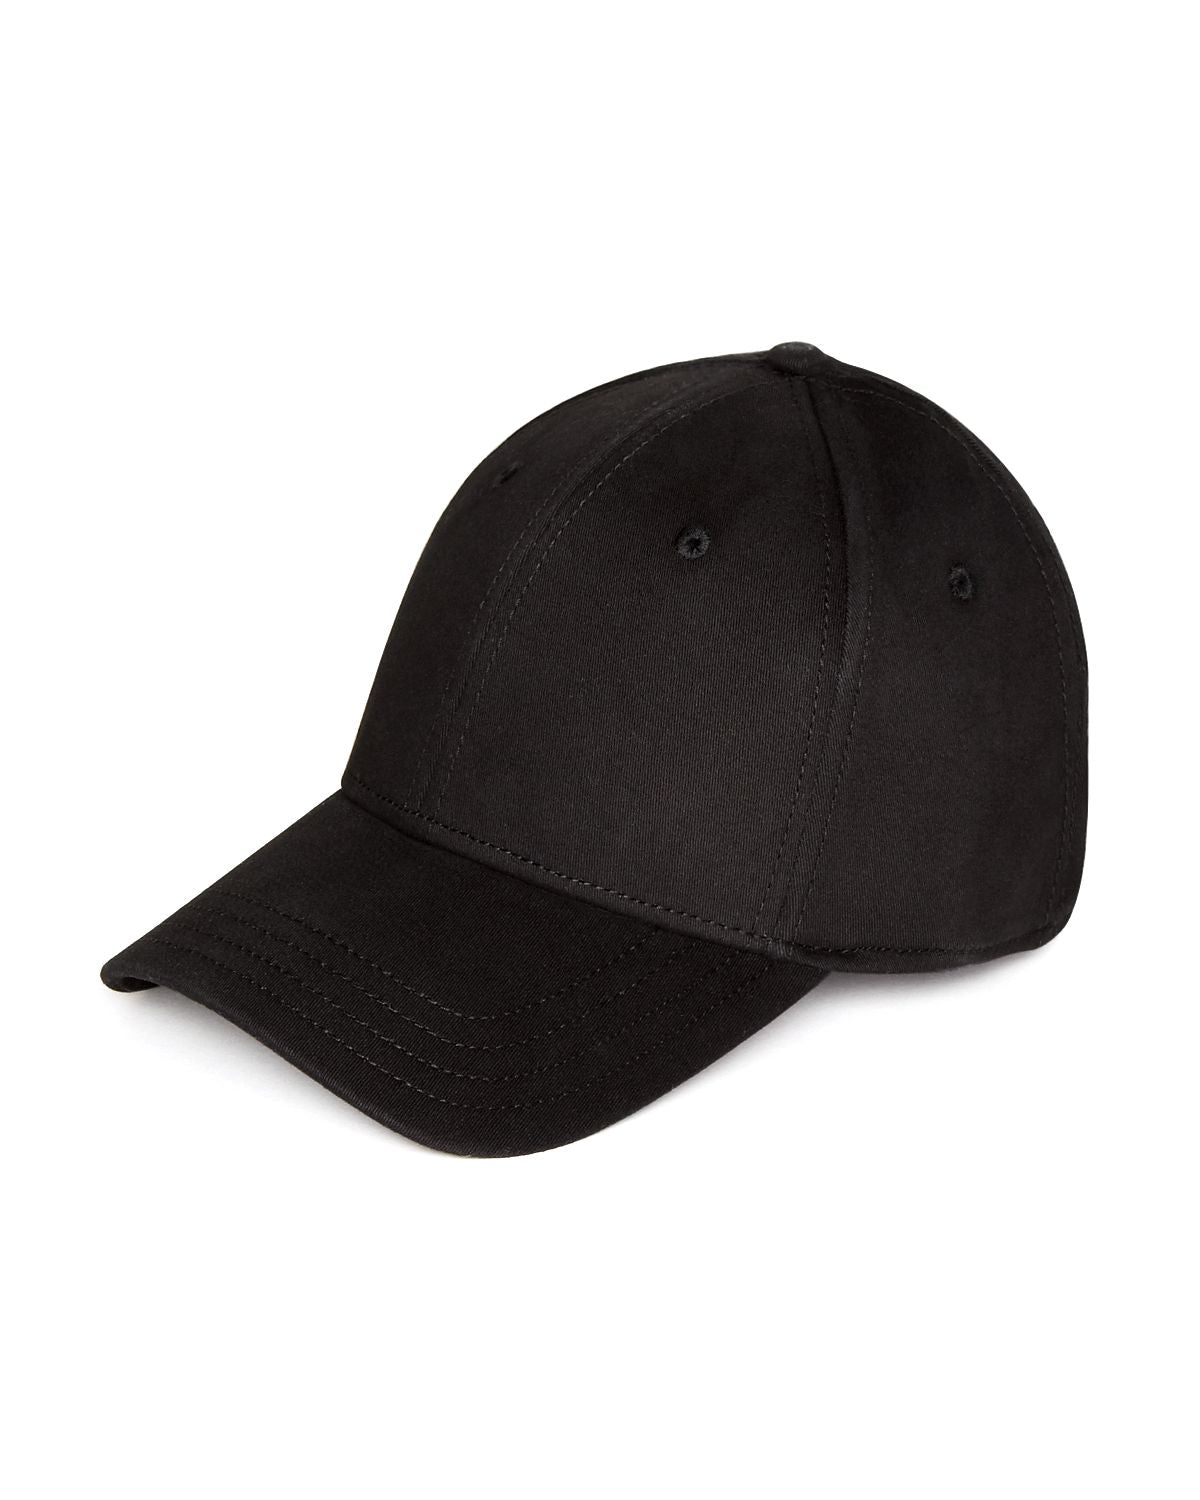 Gents The Director's Fitted Cap Black